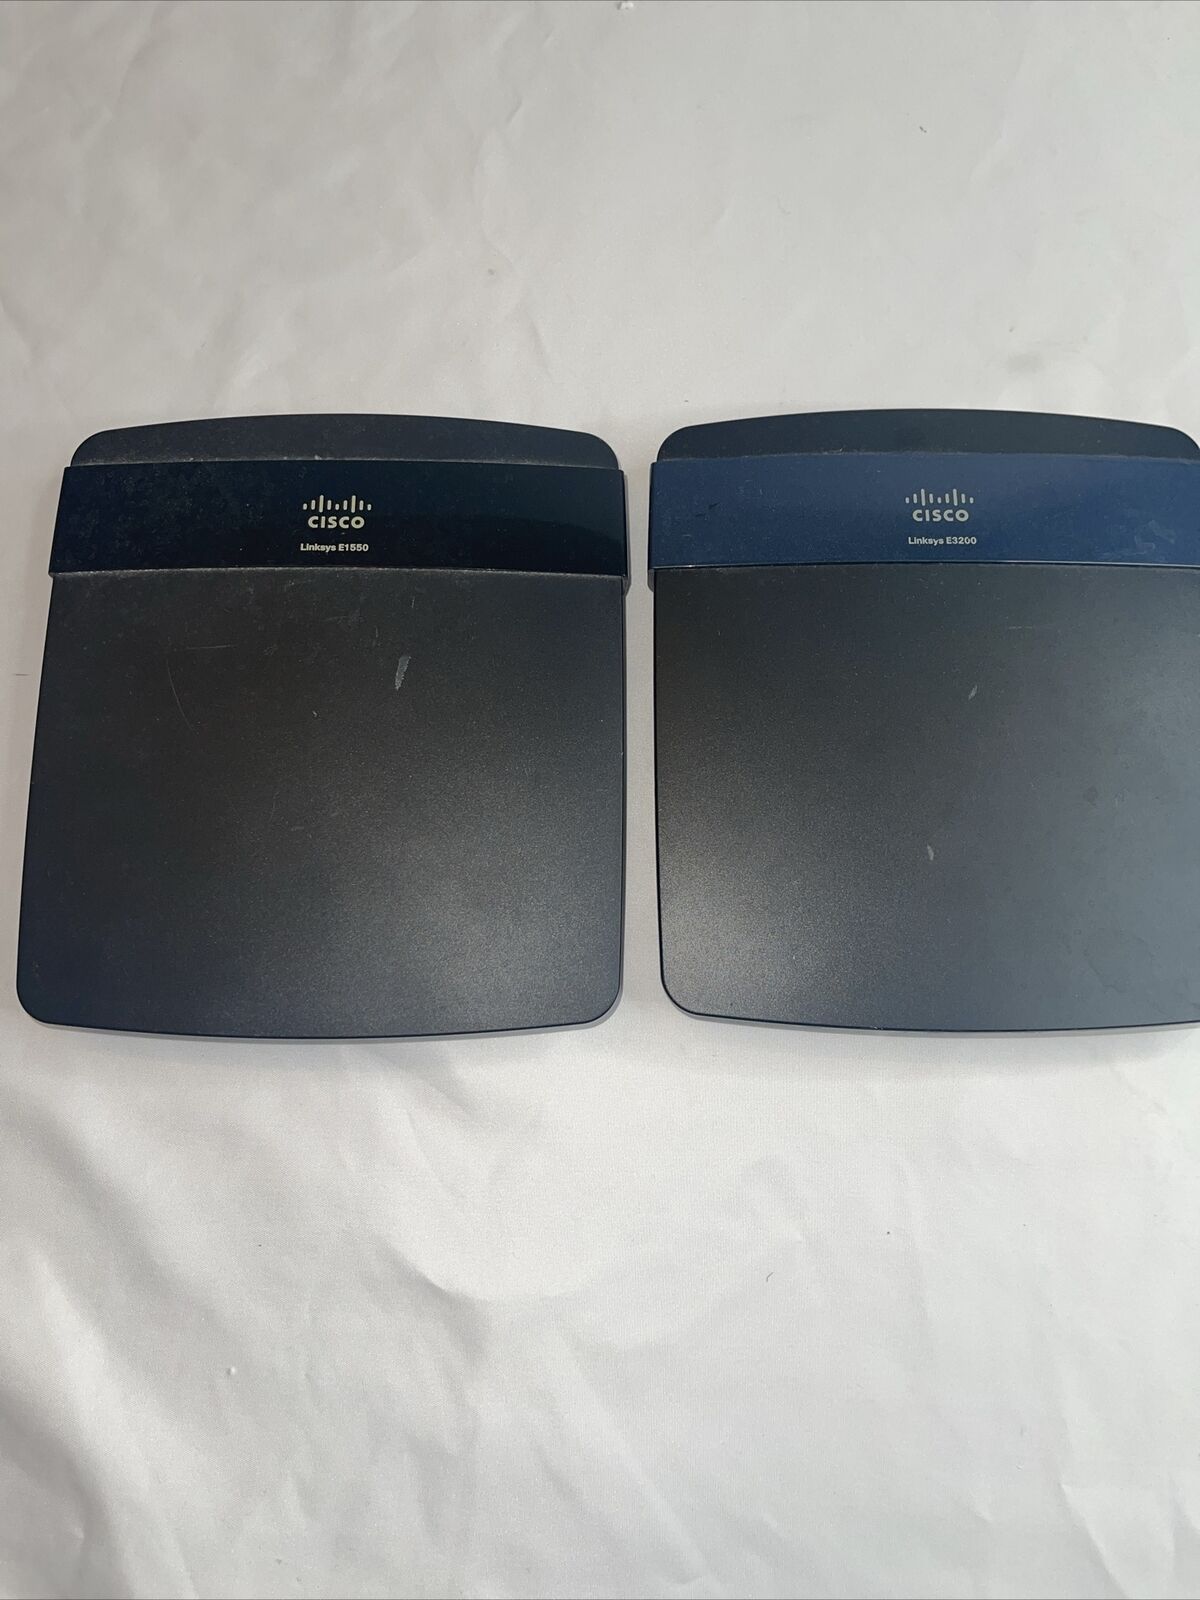 Cisco Linksys E3200 and E1550 -  4-Port Wireless Wi-Fi Router without Adapters